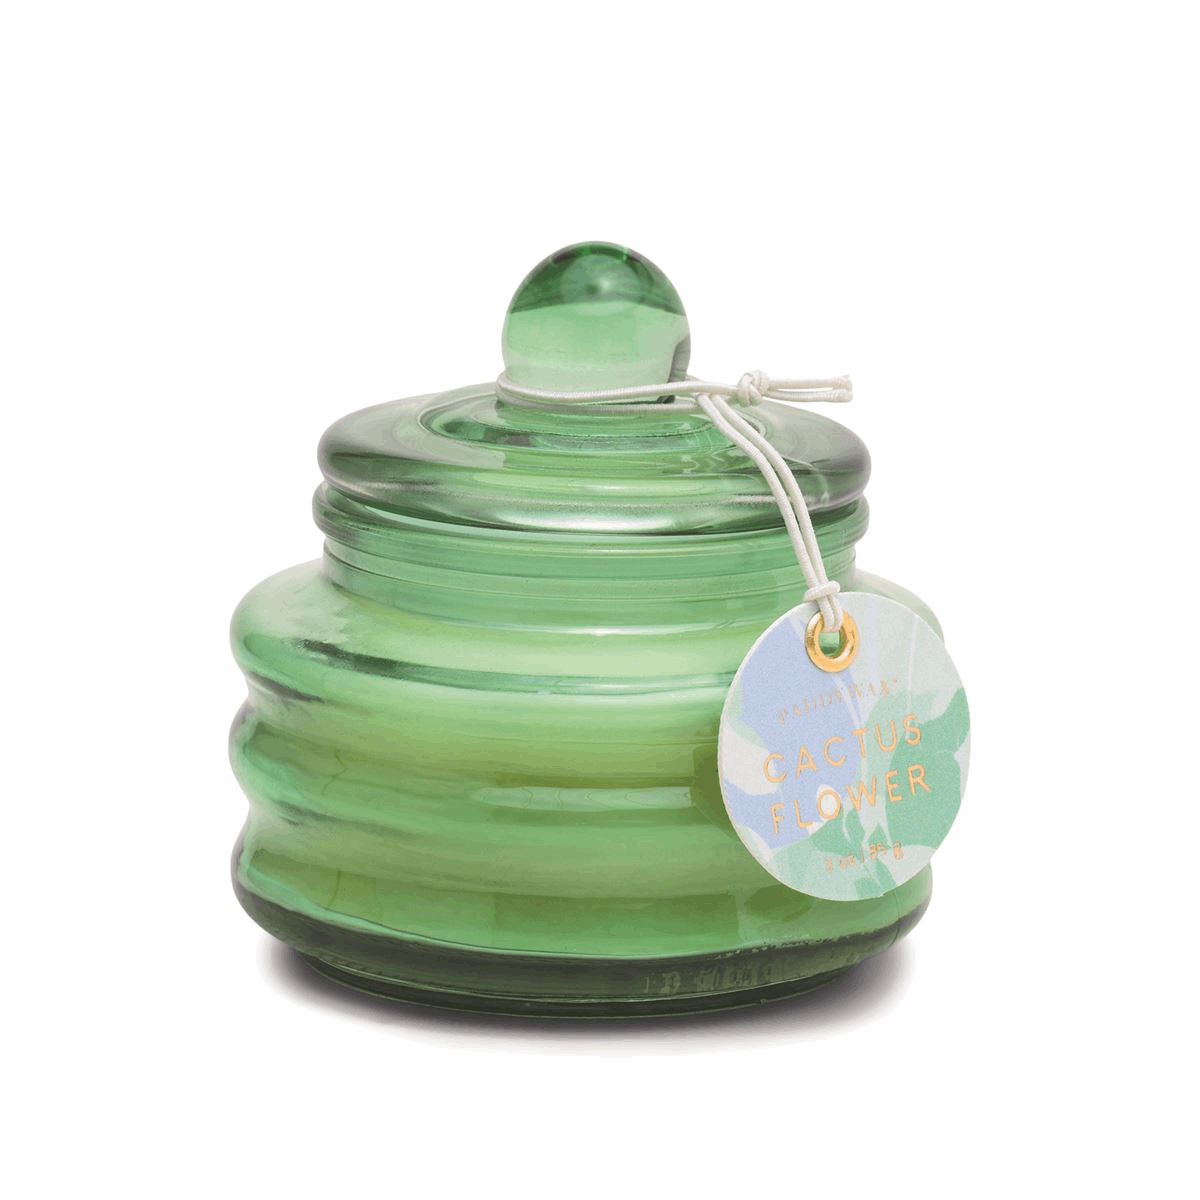 BEAM MINT GREEN GLASS WITH LID - CACTUS FLOWER